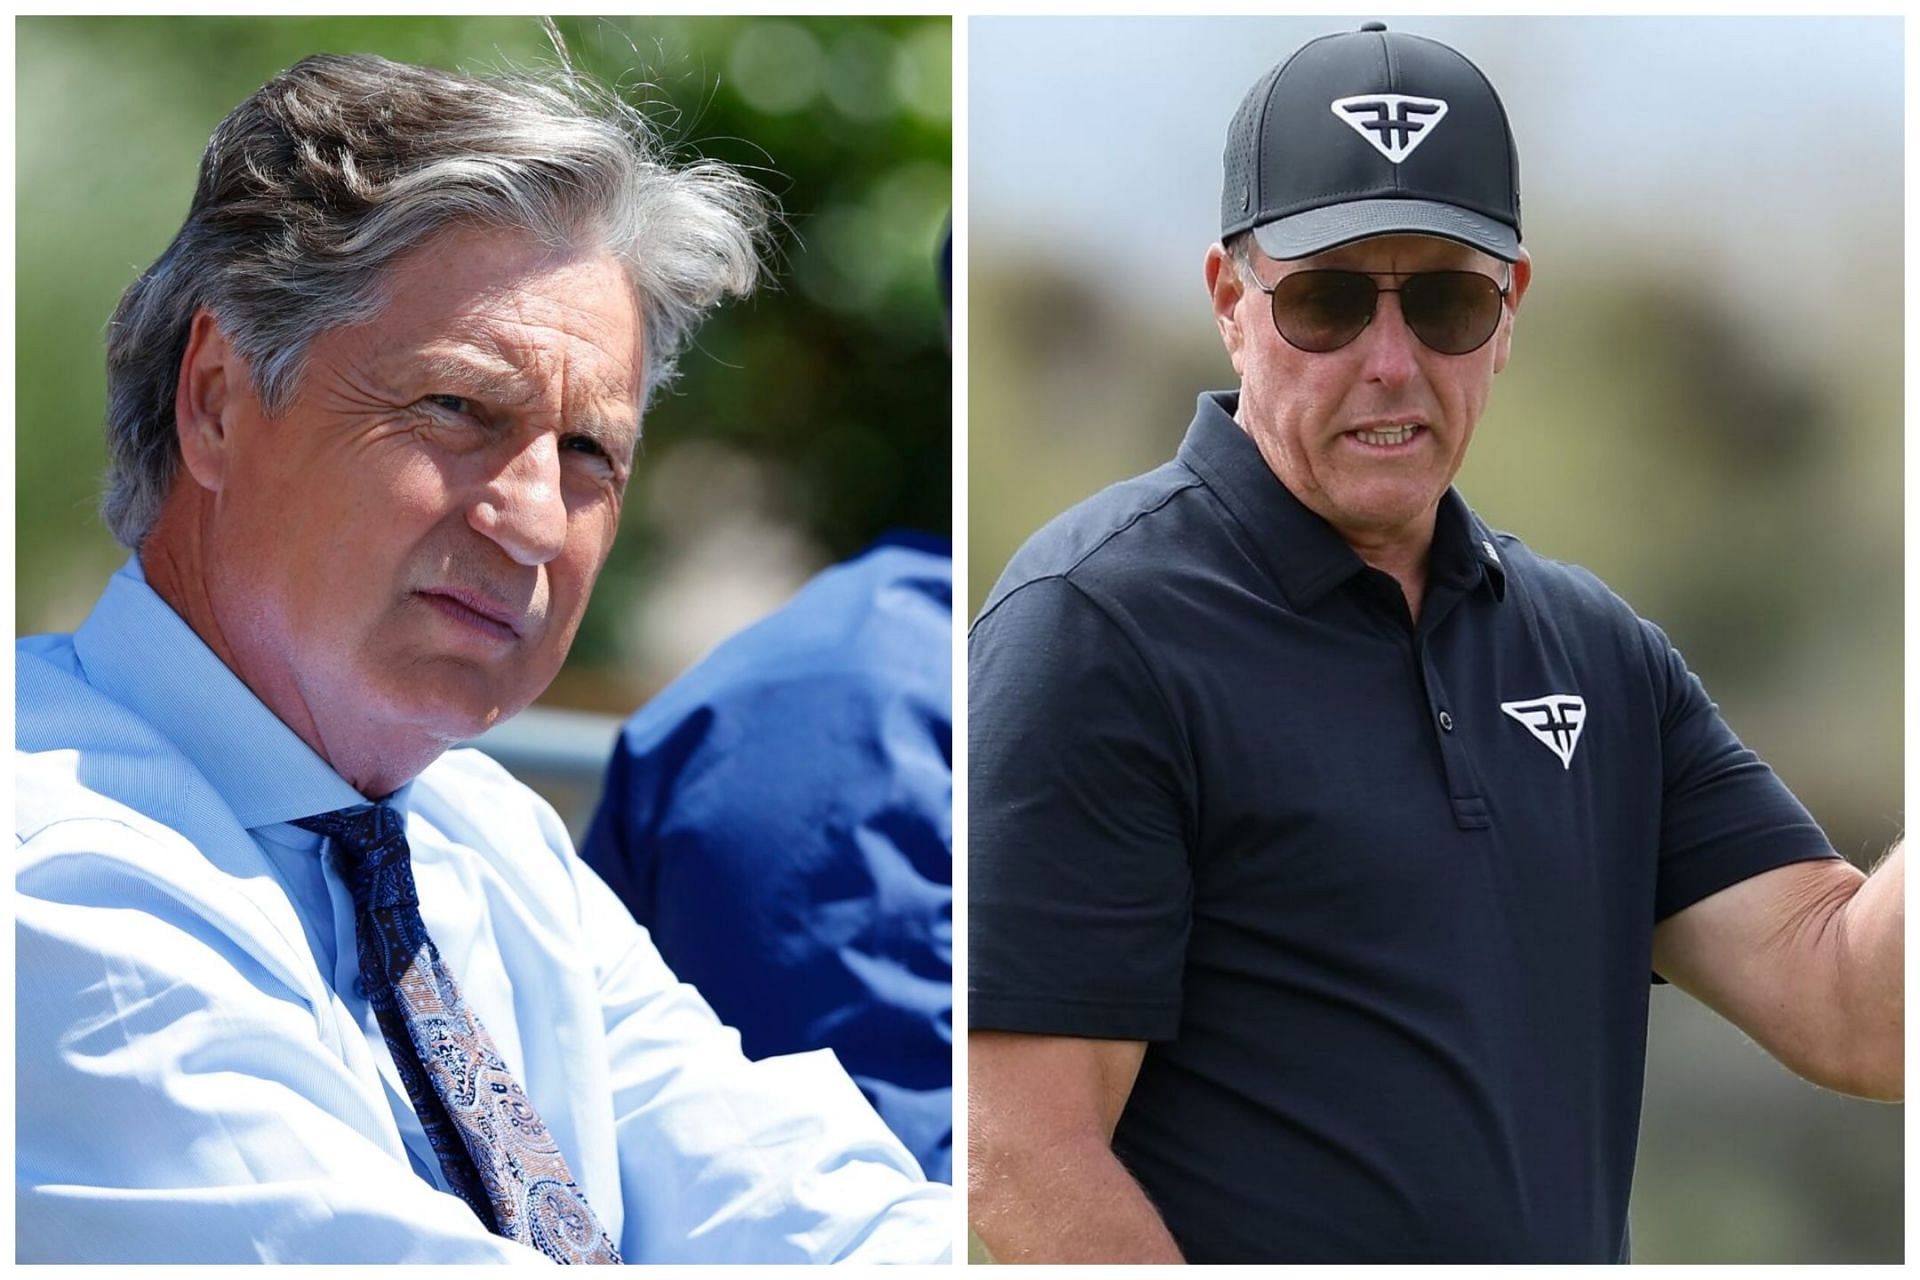 Phil Mickelson has invited Brandel Chamblee for a debate at LIV Golf London